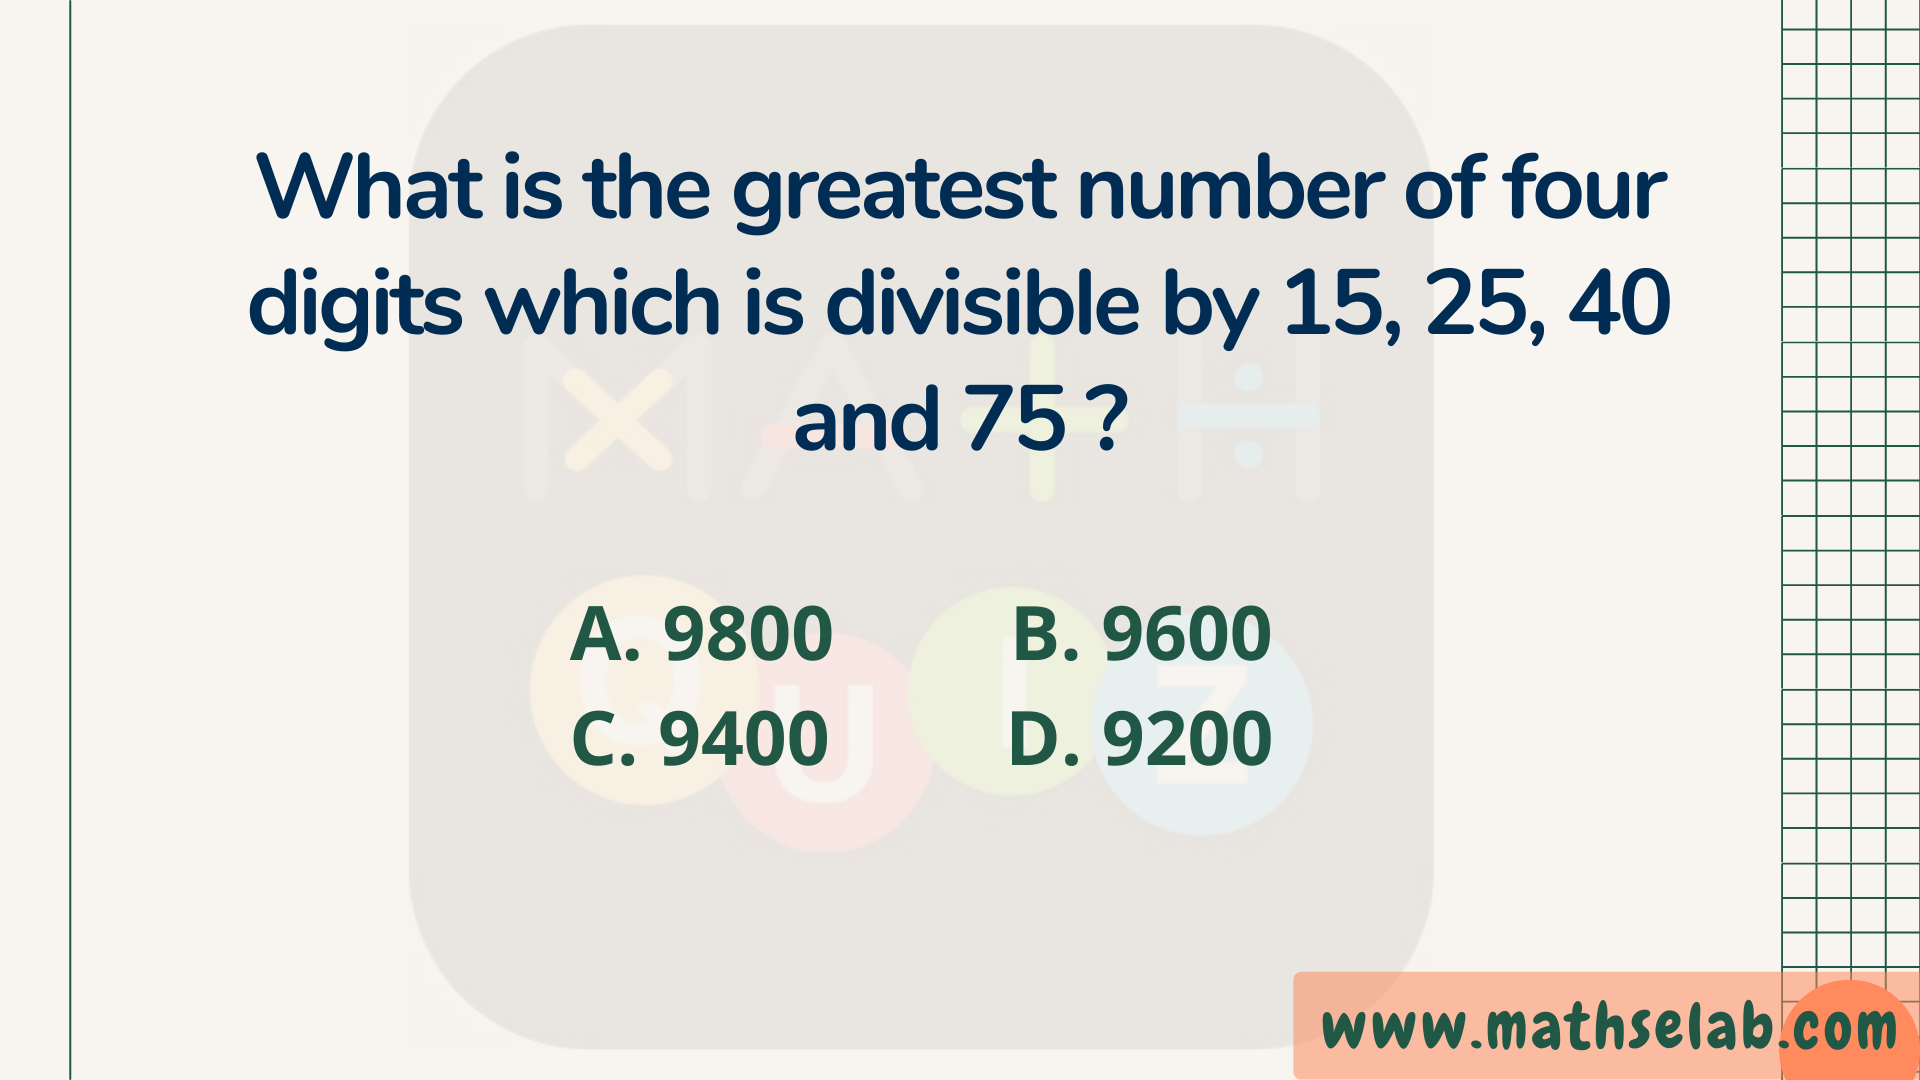 What is the greatest number of four digits which is divisible by 15, 25, 40 and 75 ?